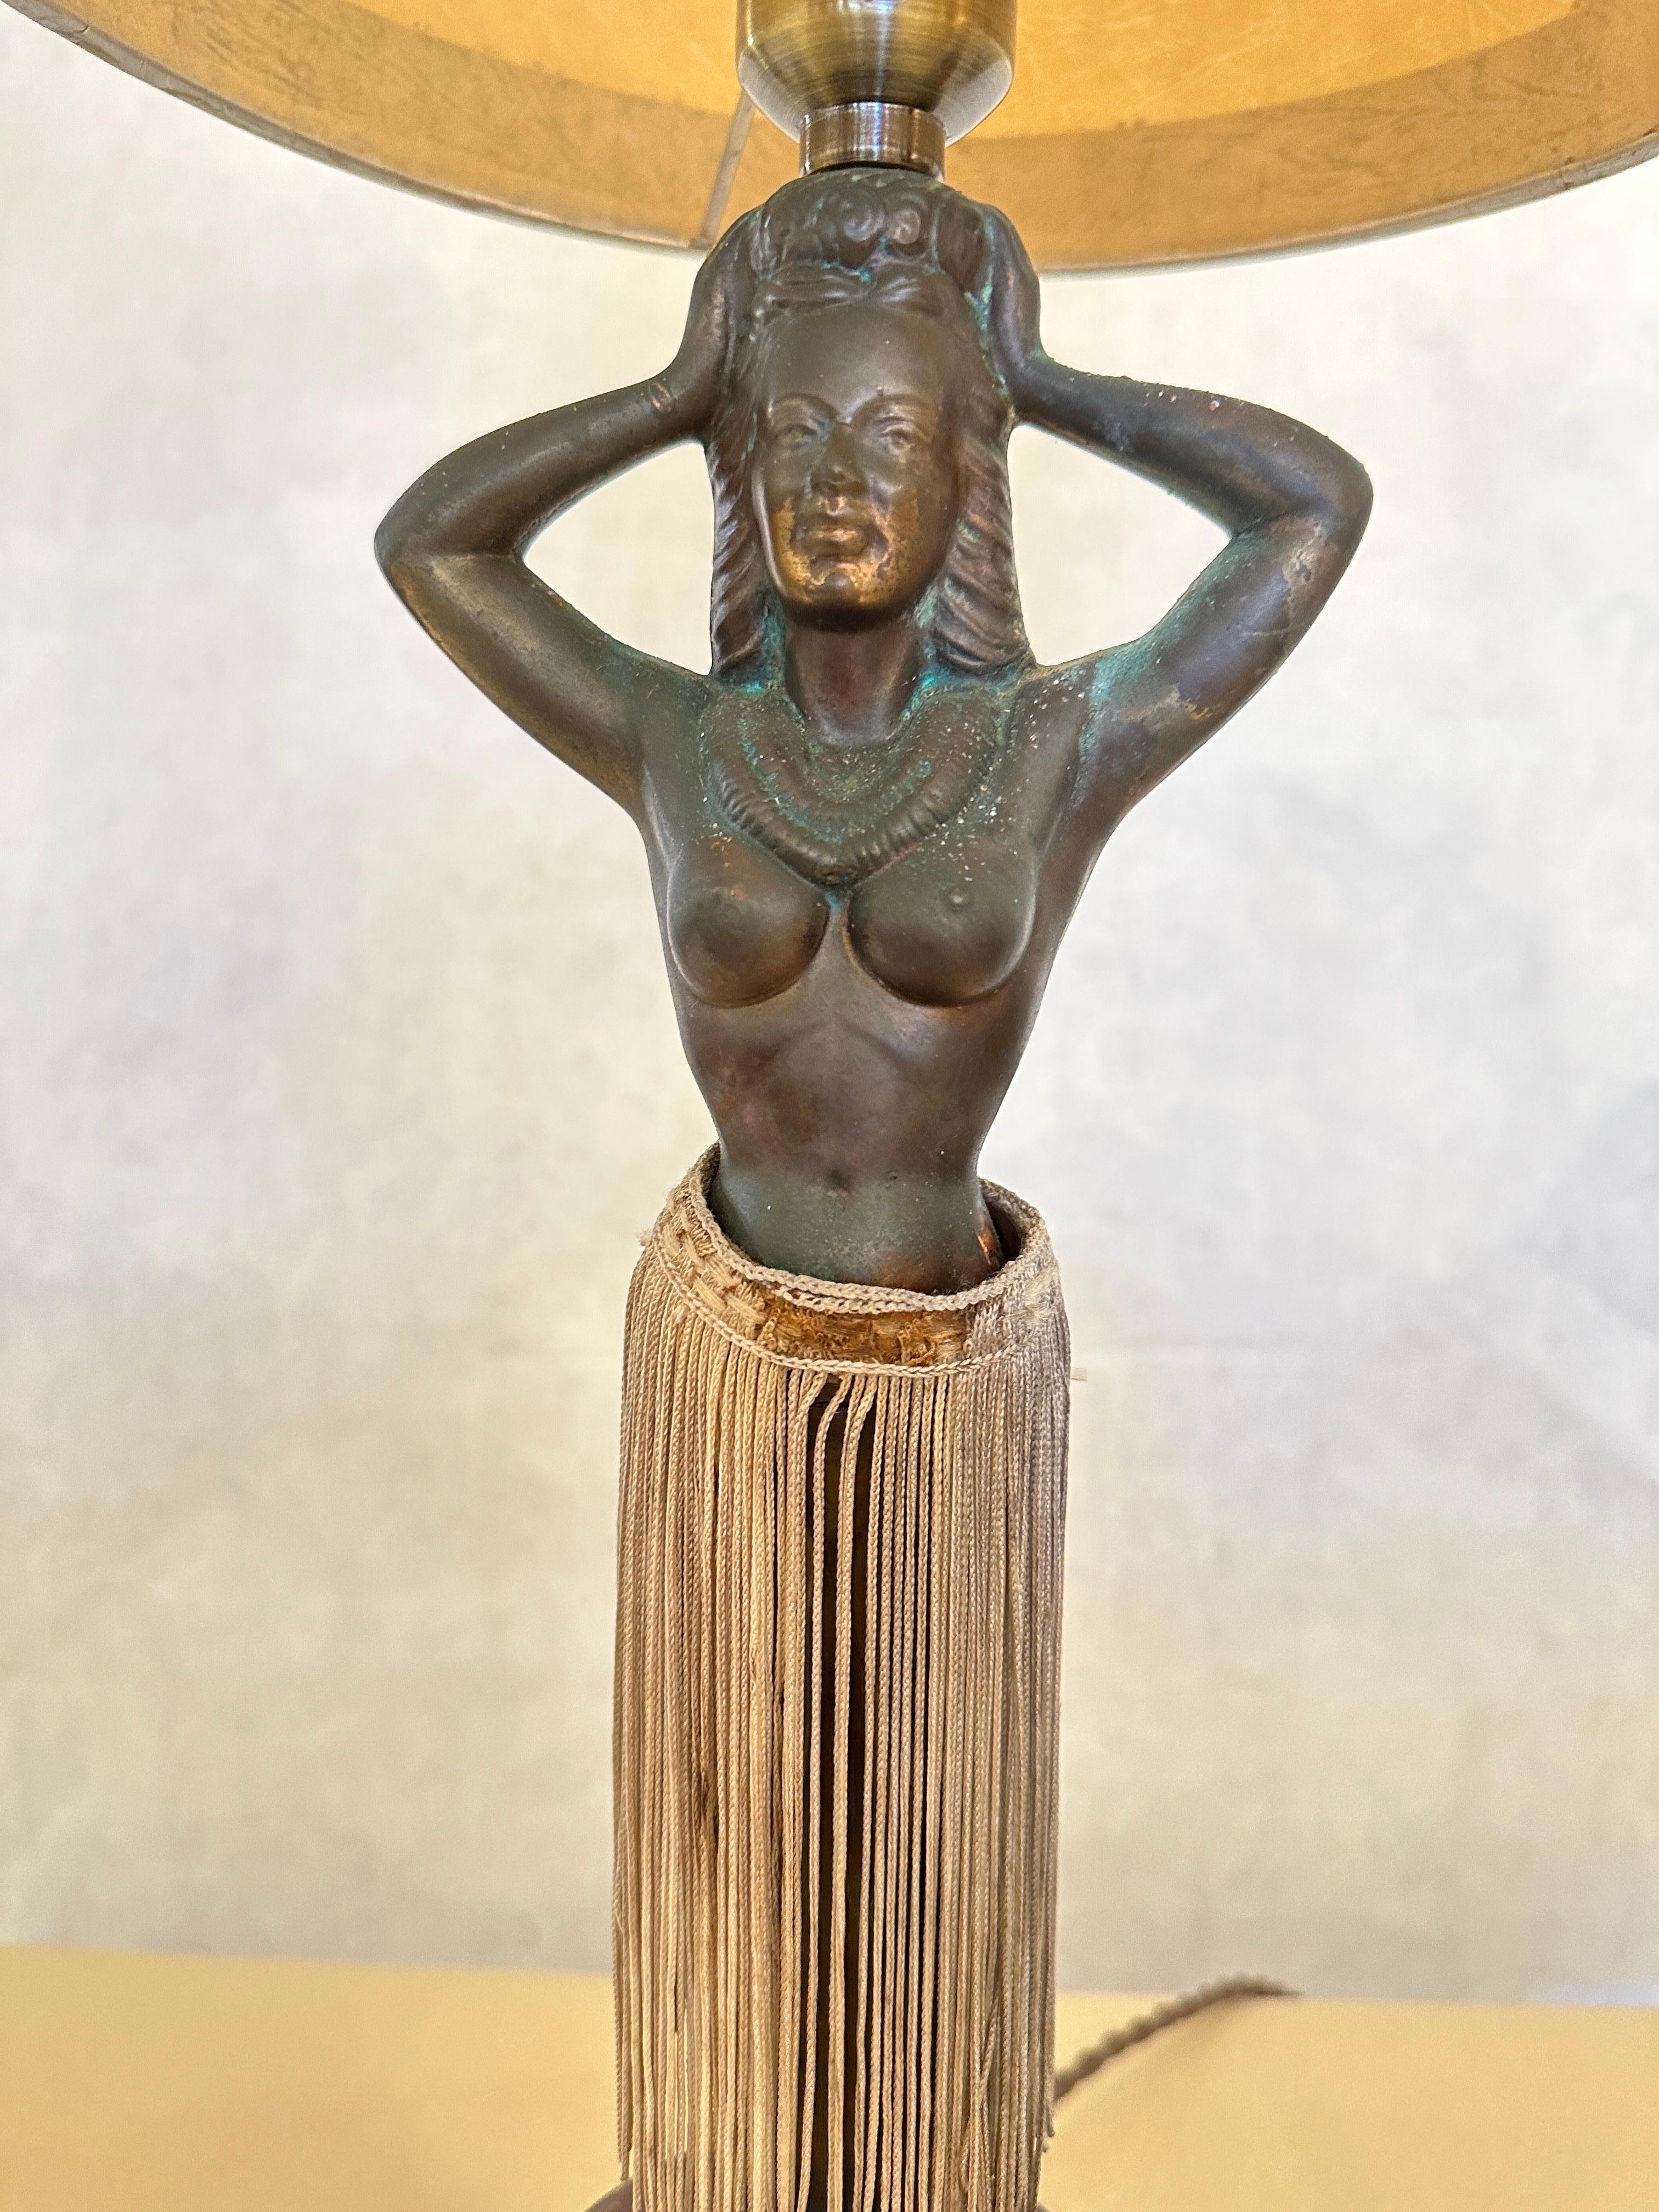 Rare and authentic post WW II era Hawaiian Hula Girl table lamp that undulates her hips with the flip of a switch. Whimsical, vintage electric copper patinated metal hula girl with original silk fringed skirt. Turn her on and be hypnotized by her